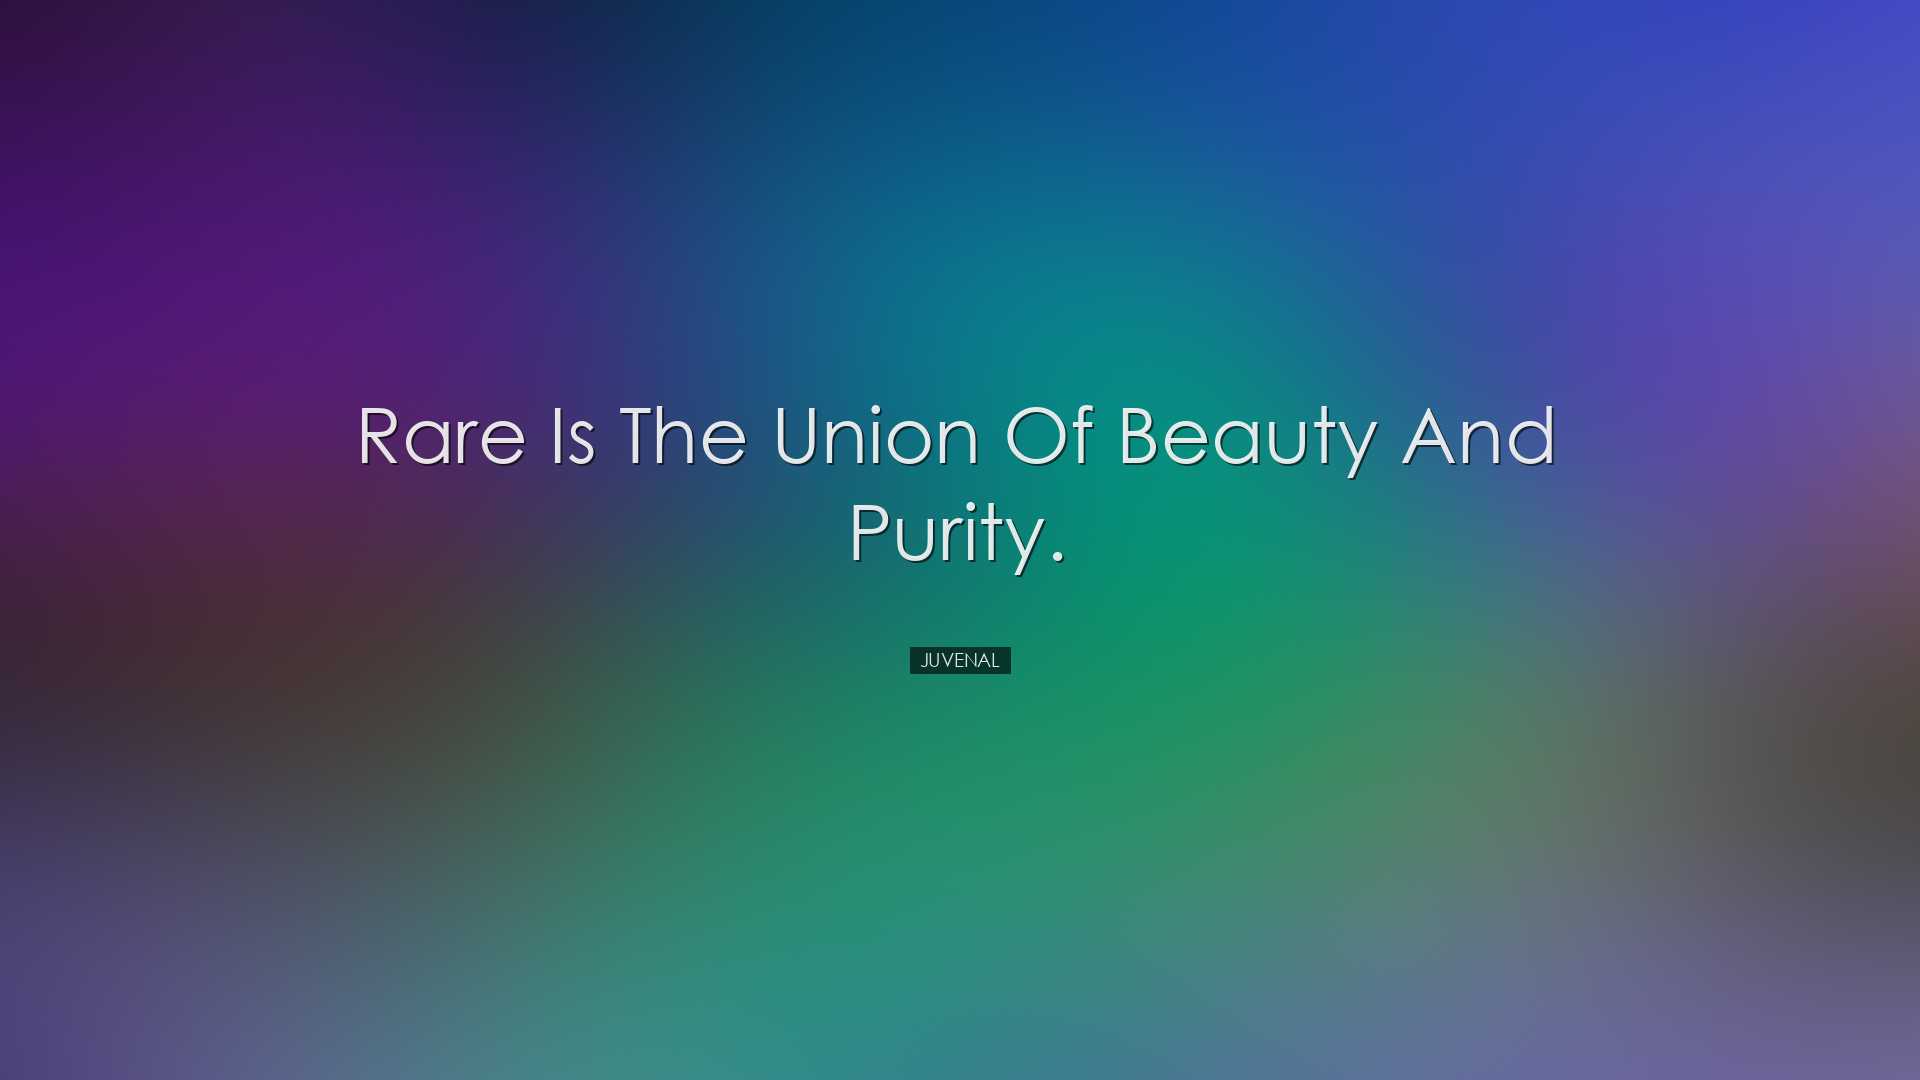 Rare is the union of beauty and purity. - Juvenal